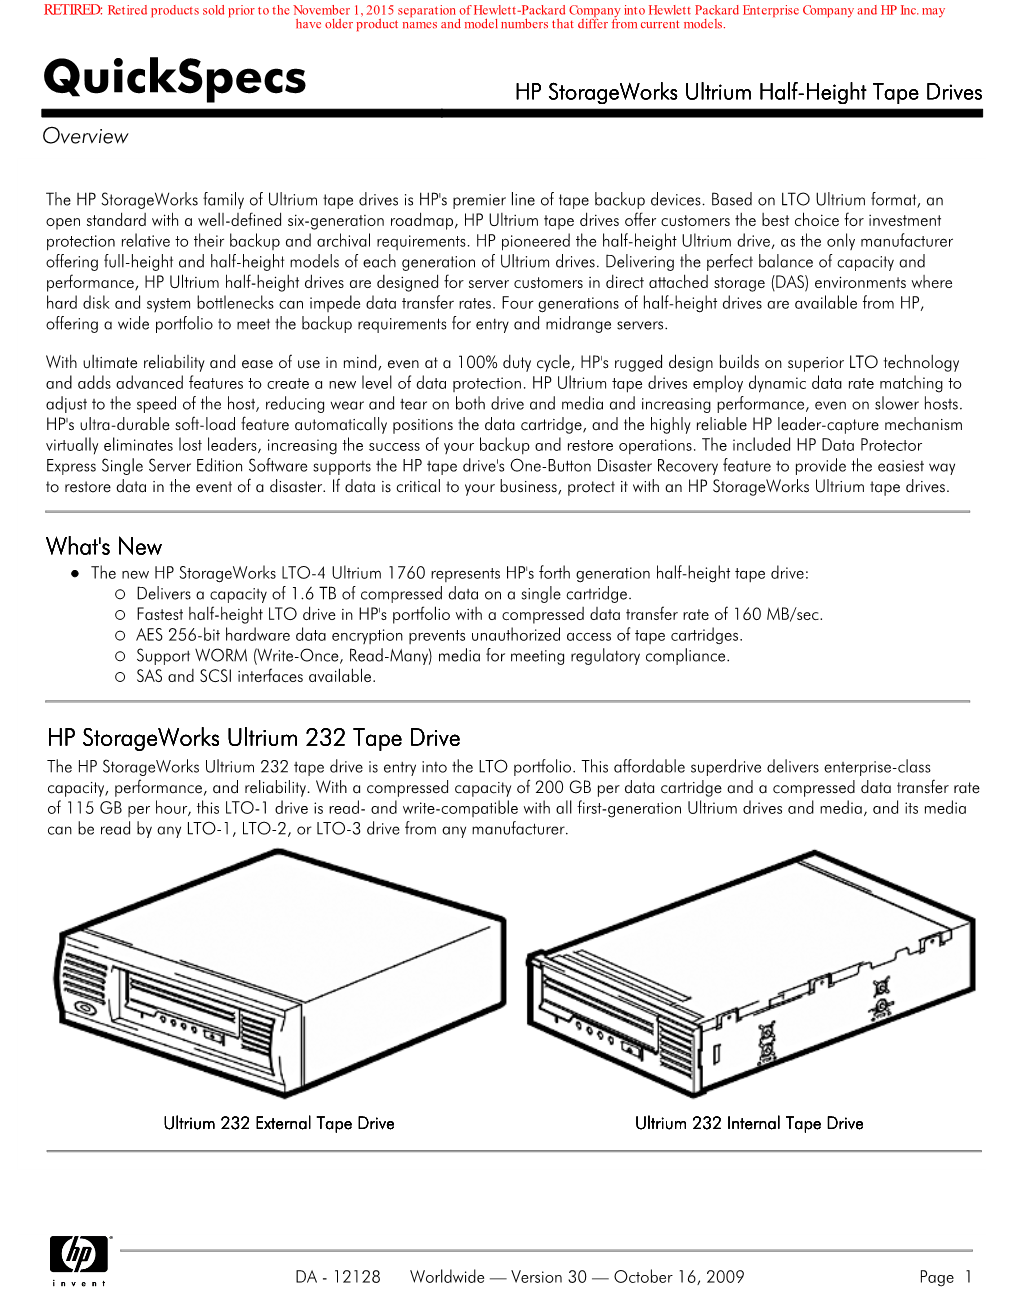 HP Storageworks Ultrium Half-Height Tape Drives Overview